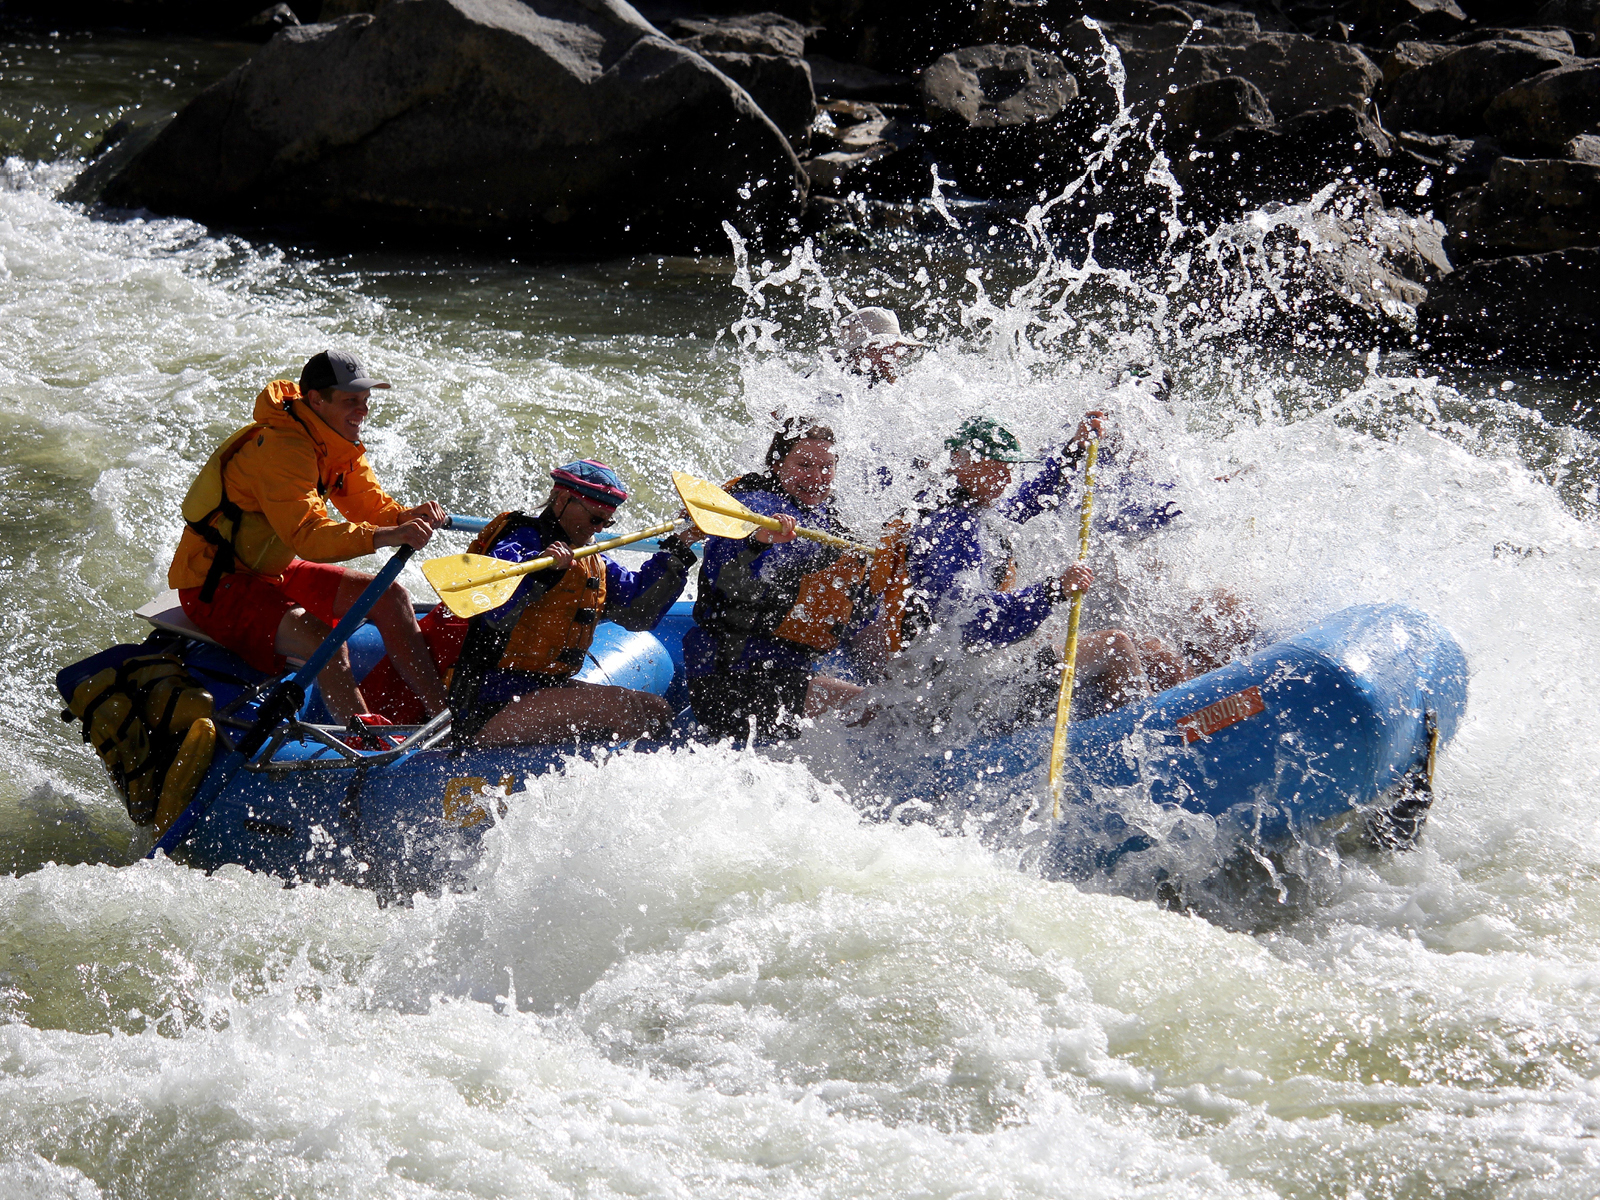 In this image, three guests and their guide revel in an exhilarating rafting adventure on the Colorado River.